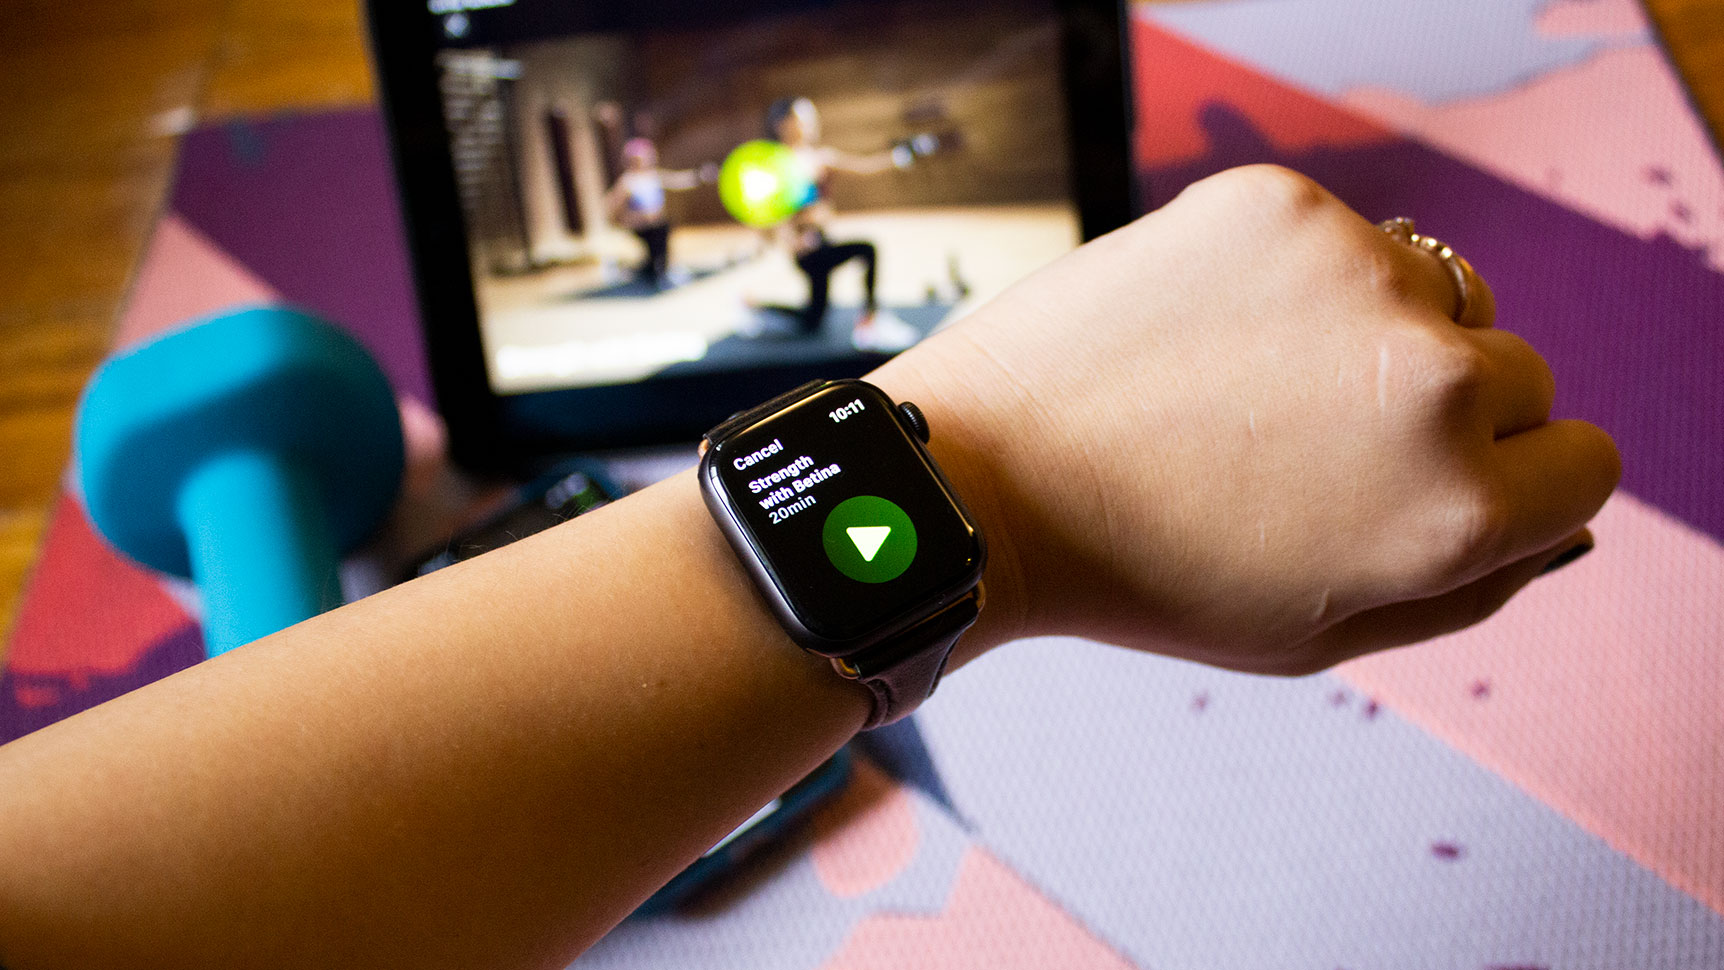 You can start, pause, and end your workouts from the wrist regardless of device. (Photo: Victoria Song/Gizmodo)